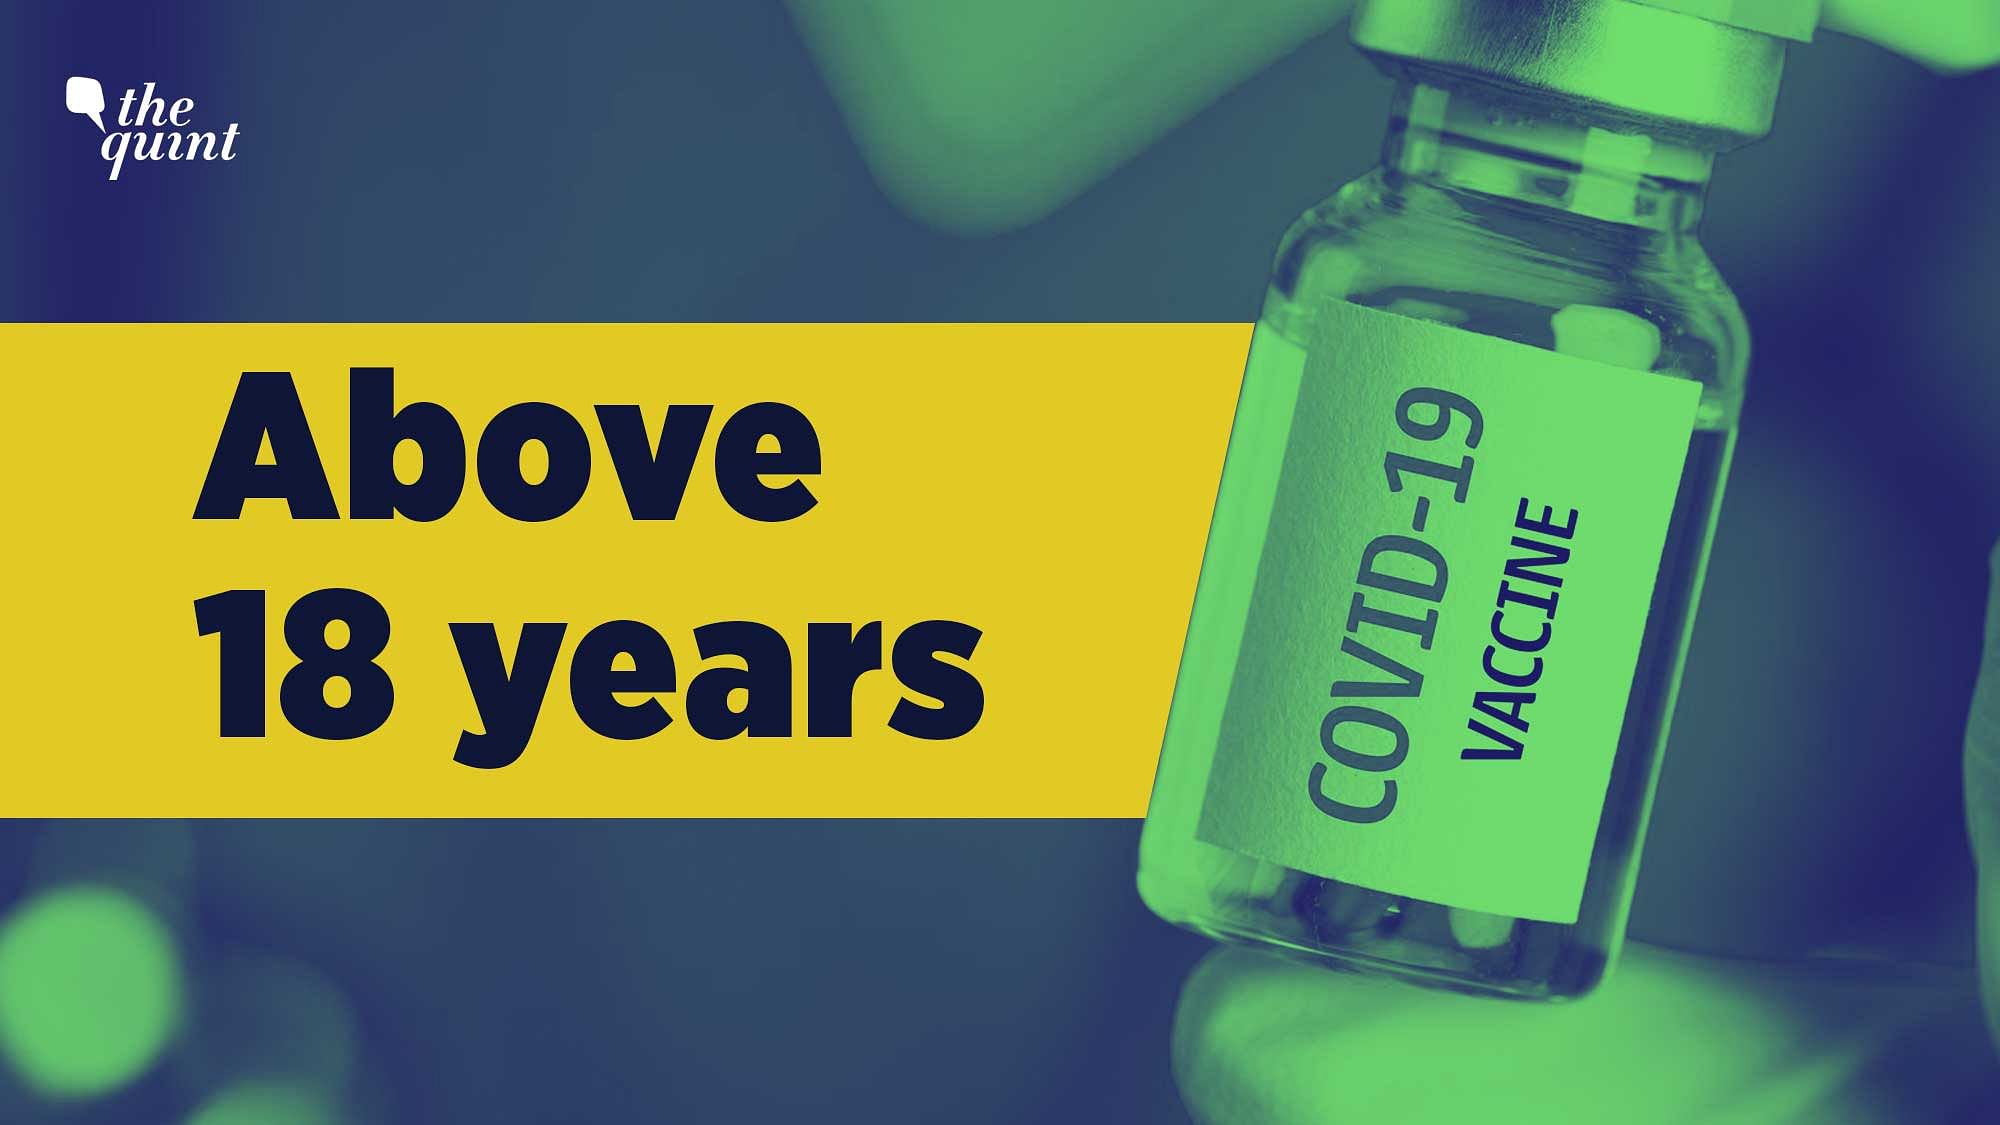 Everyone above 18 years of age will be eligible for the COVID-19 vaccine from 1 May.